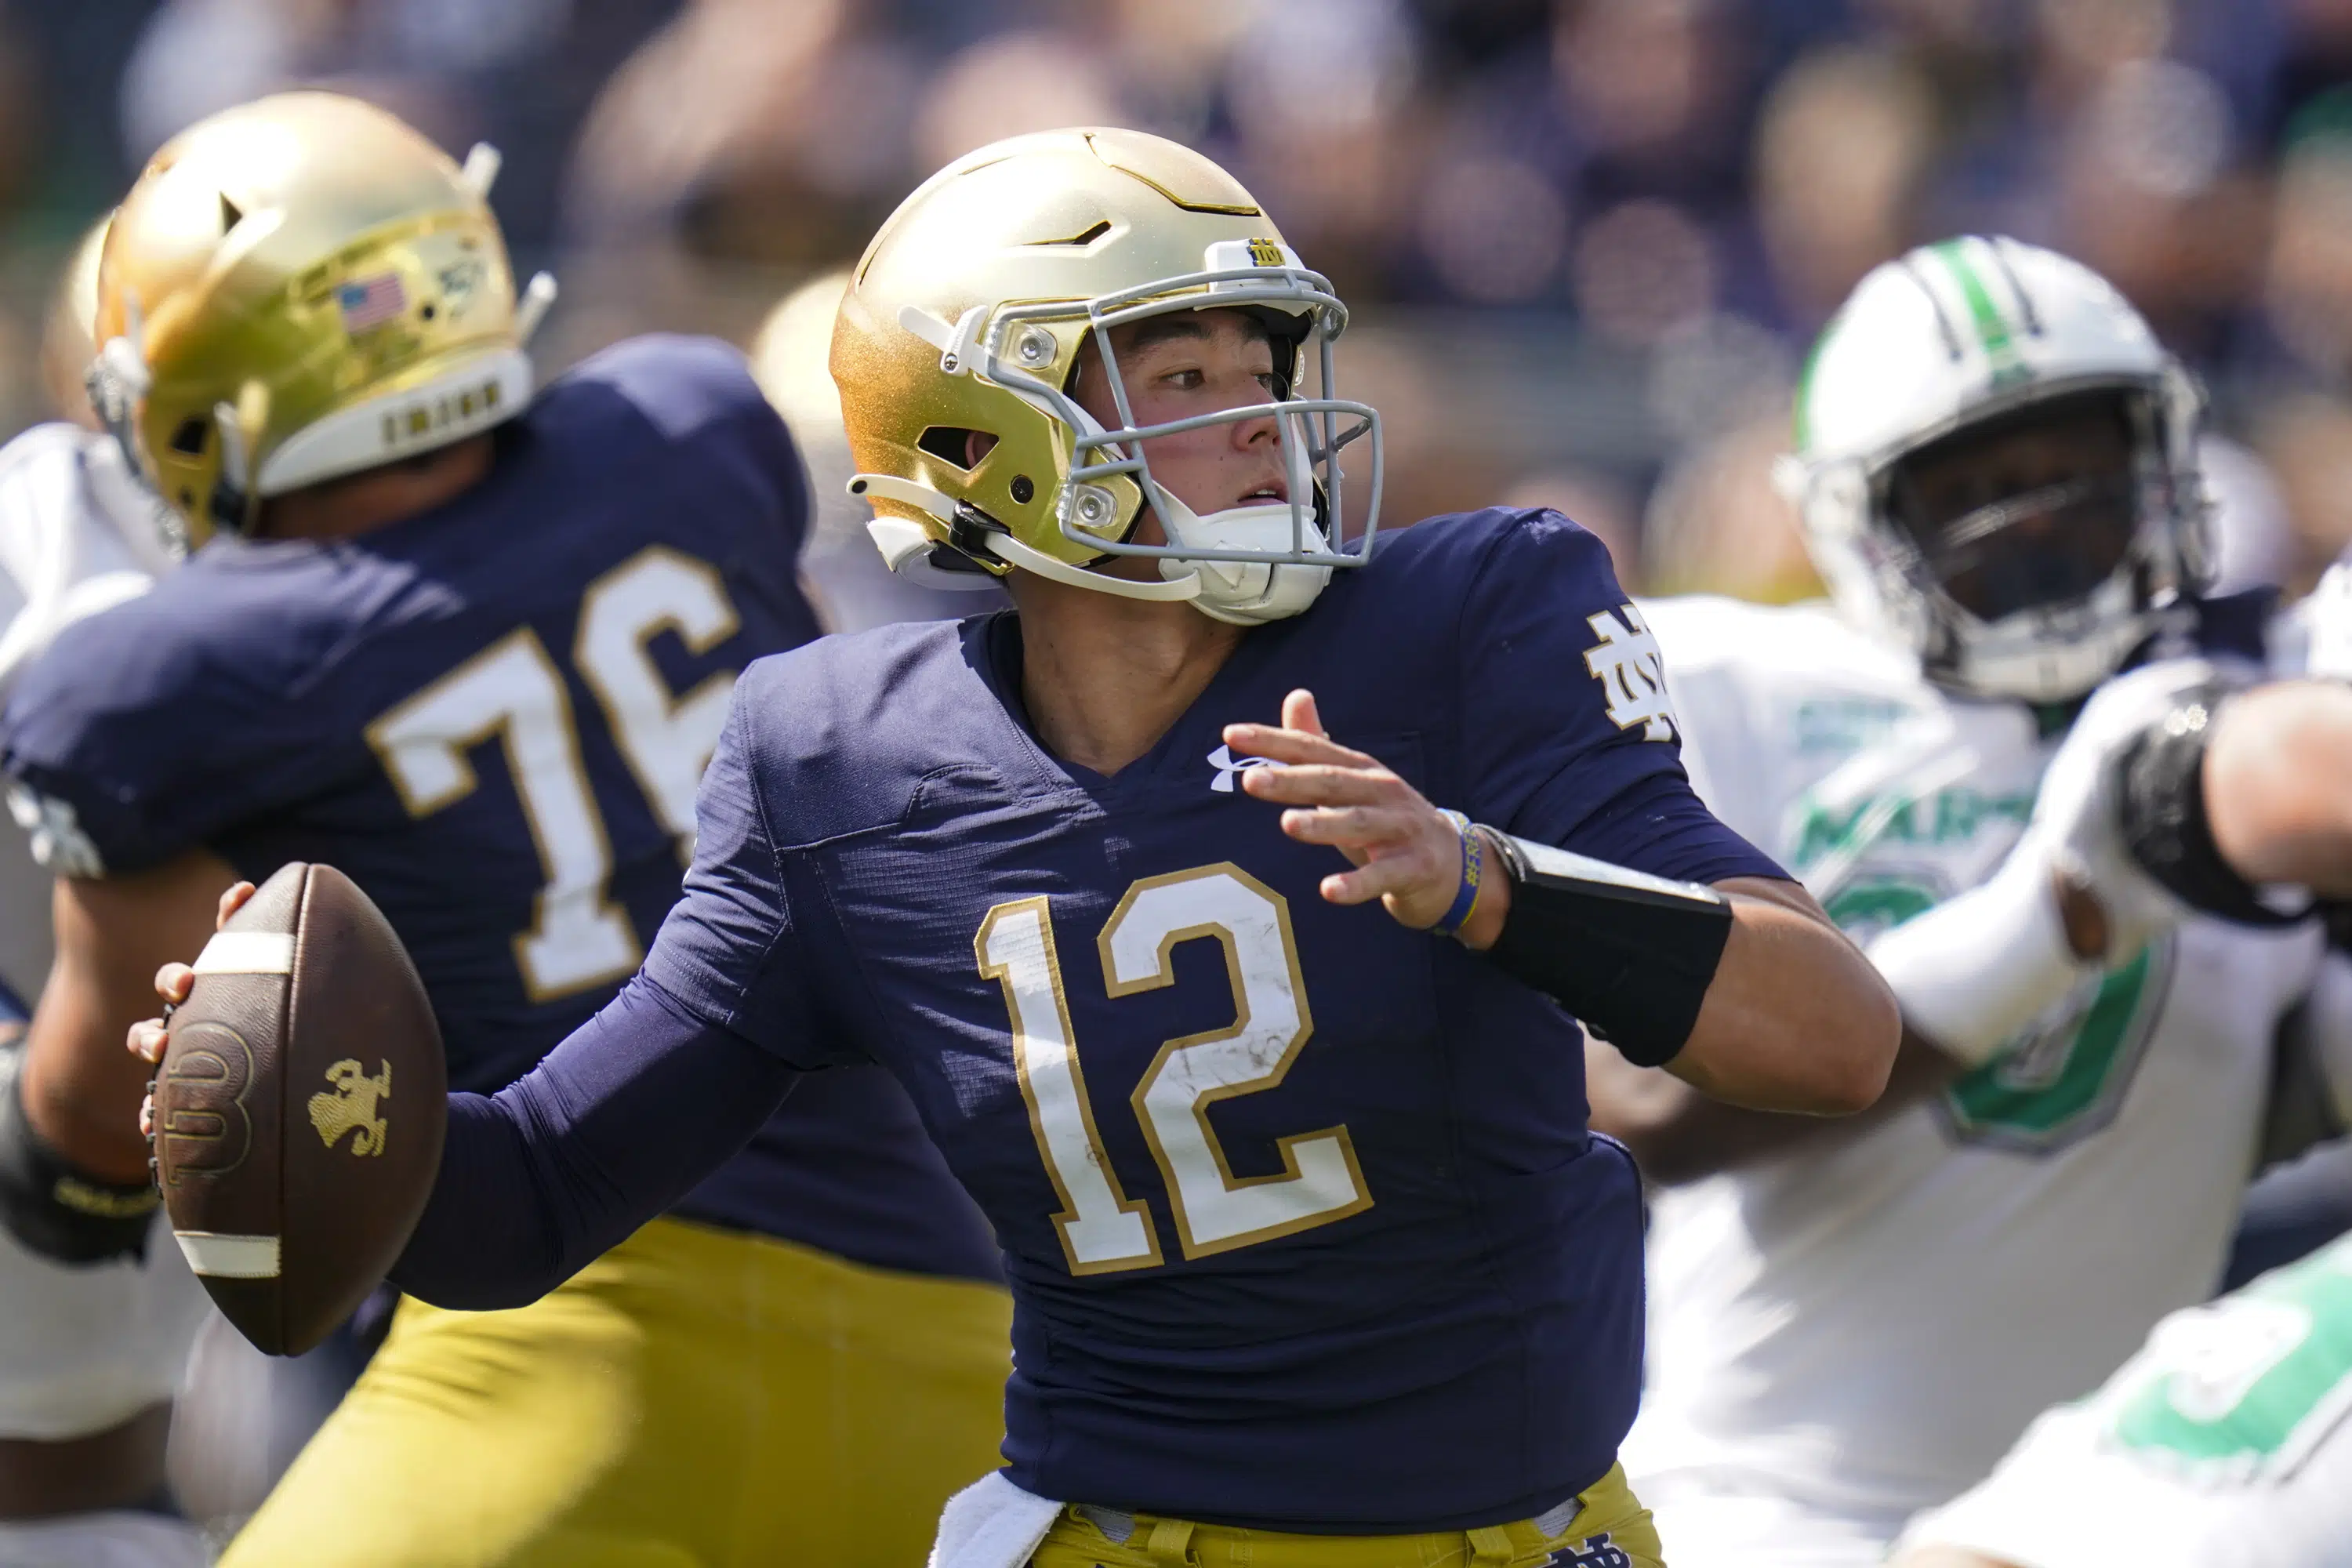 Notre Dame, South Carolina will look much different in bowl